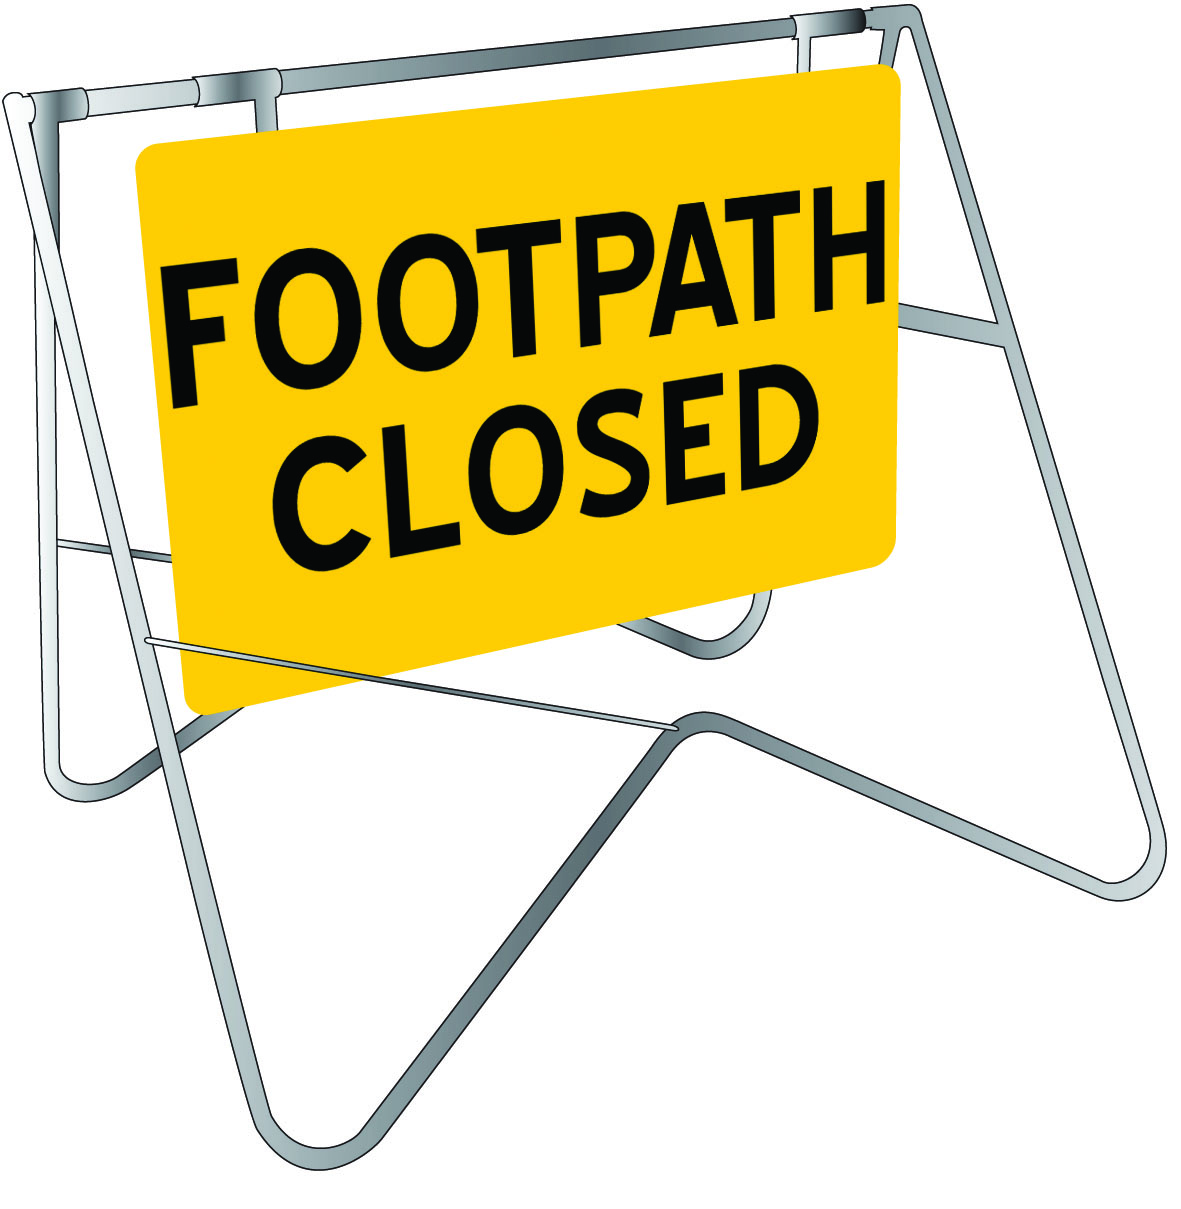 UNIFORM SAFETY 600X600MM CL1 SWING STAND AND SIGN FOOTPATH CLOSED